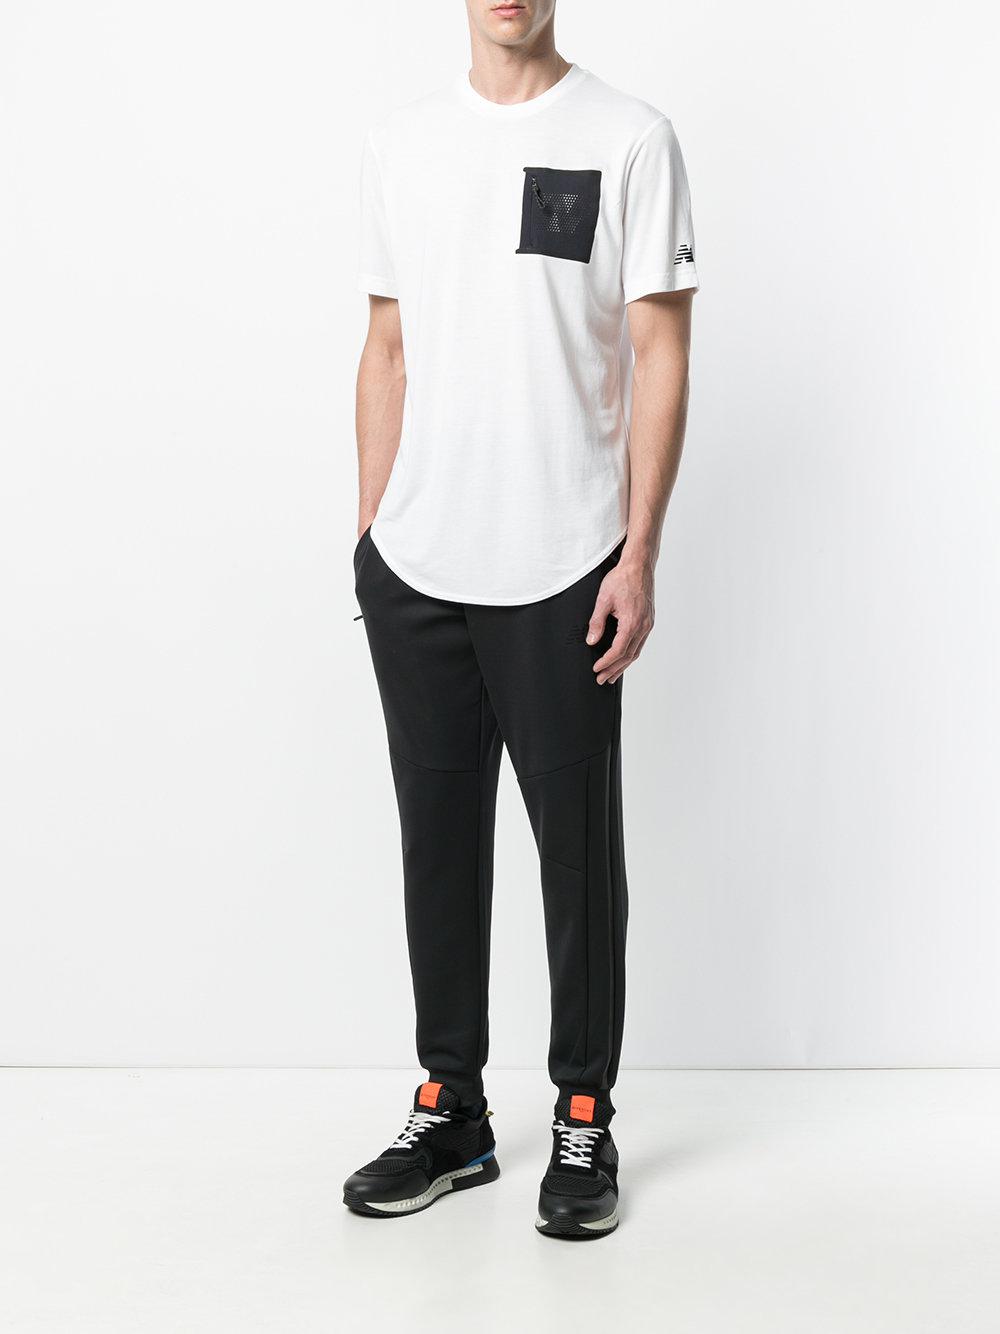 Lyst - New Balance Panelled Track Pants in Black for Men